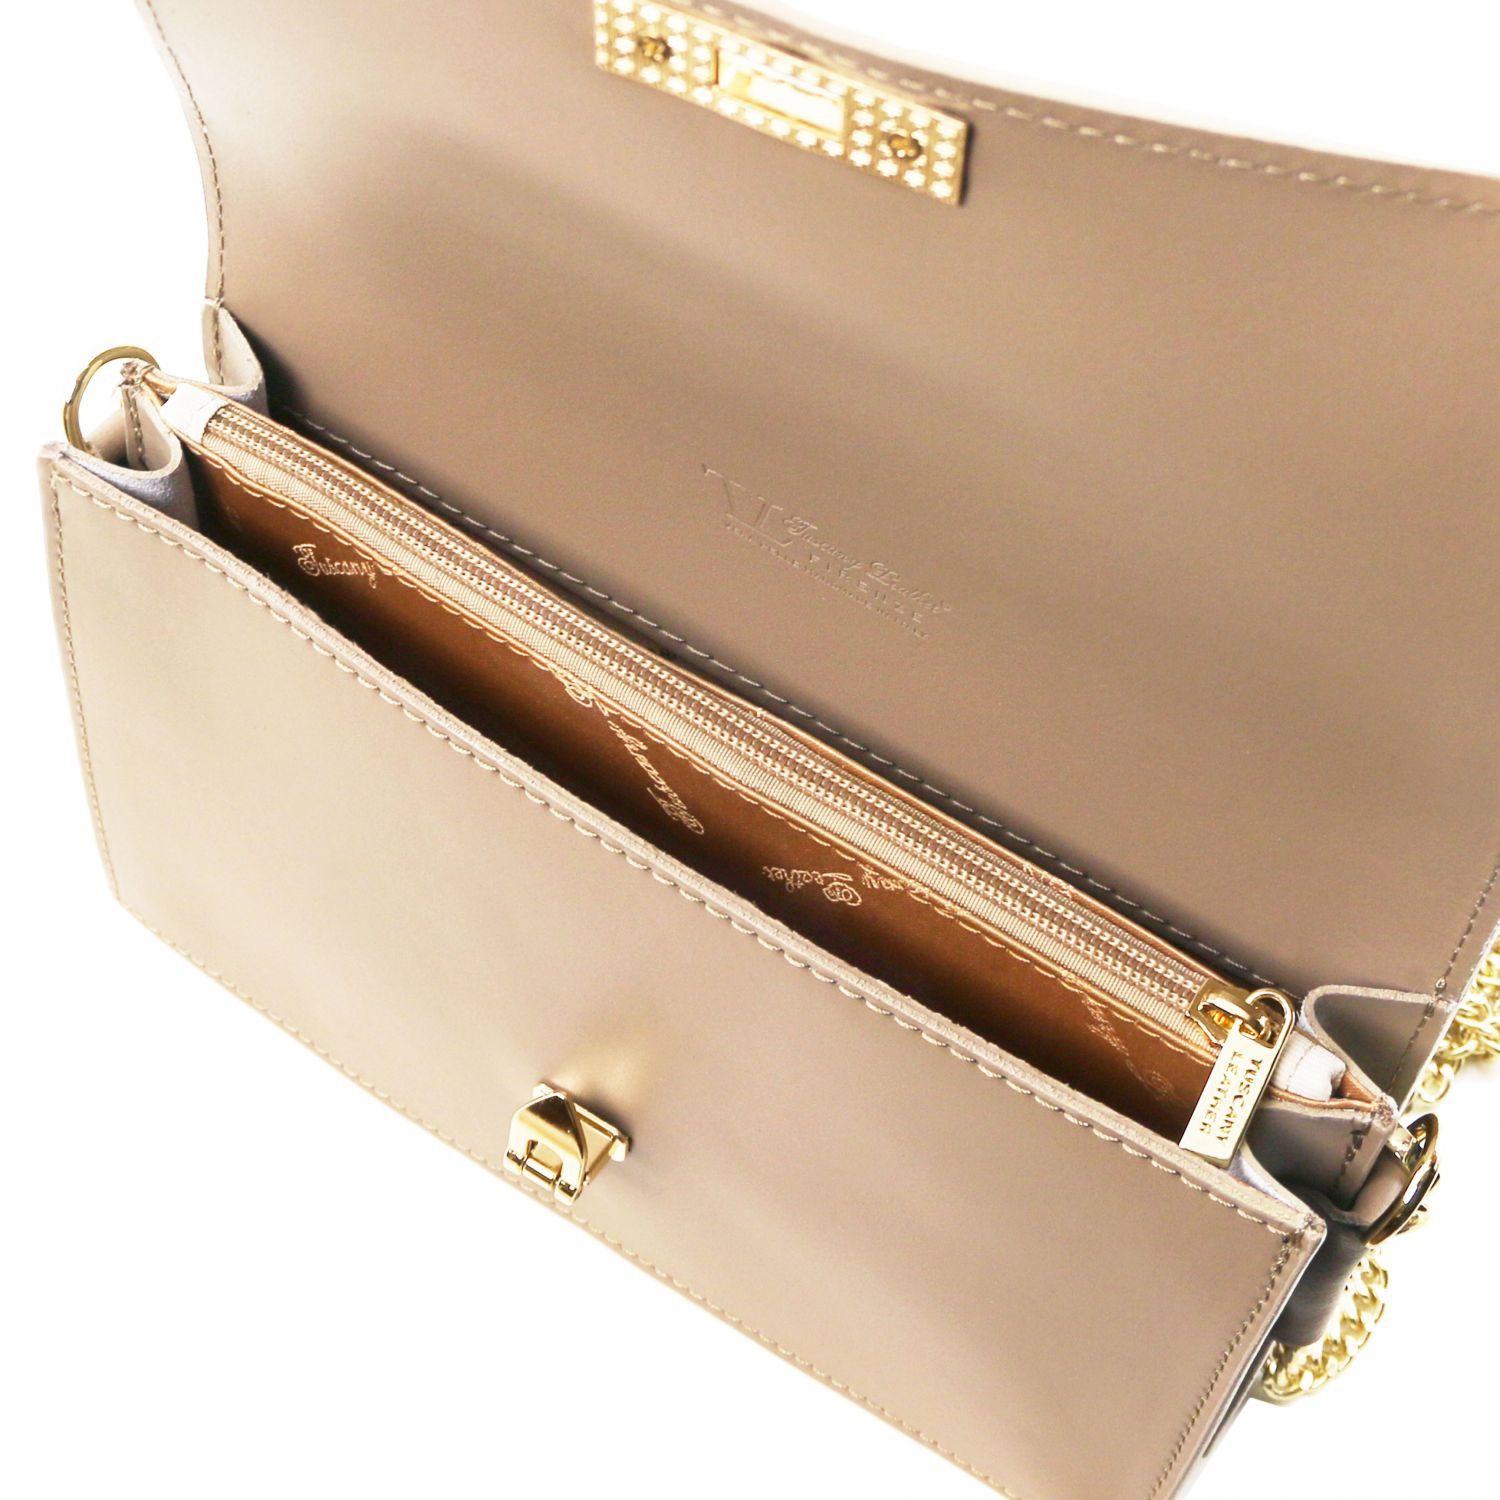 TL Bag Ruga Leather Clutch With Chain Strap Light Taupe TL141653